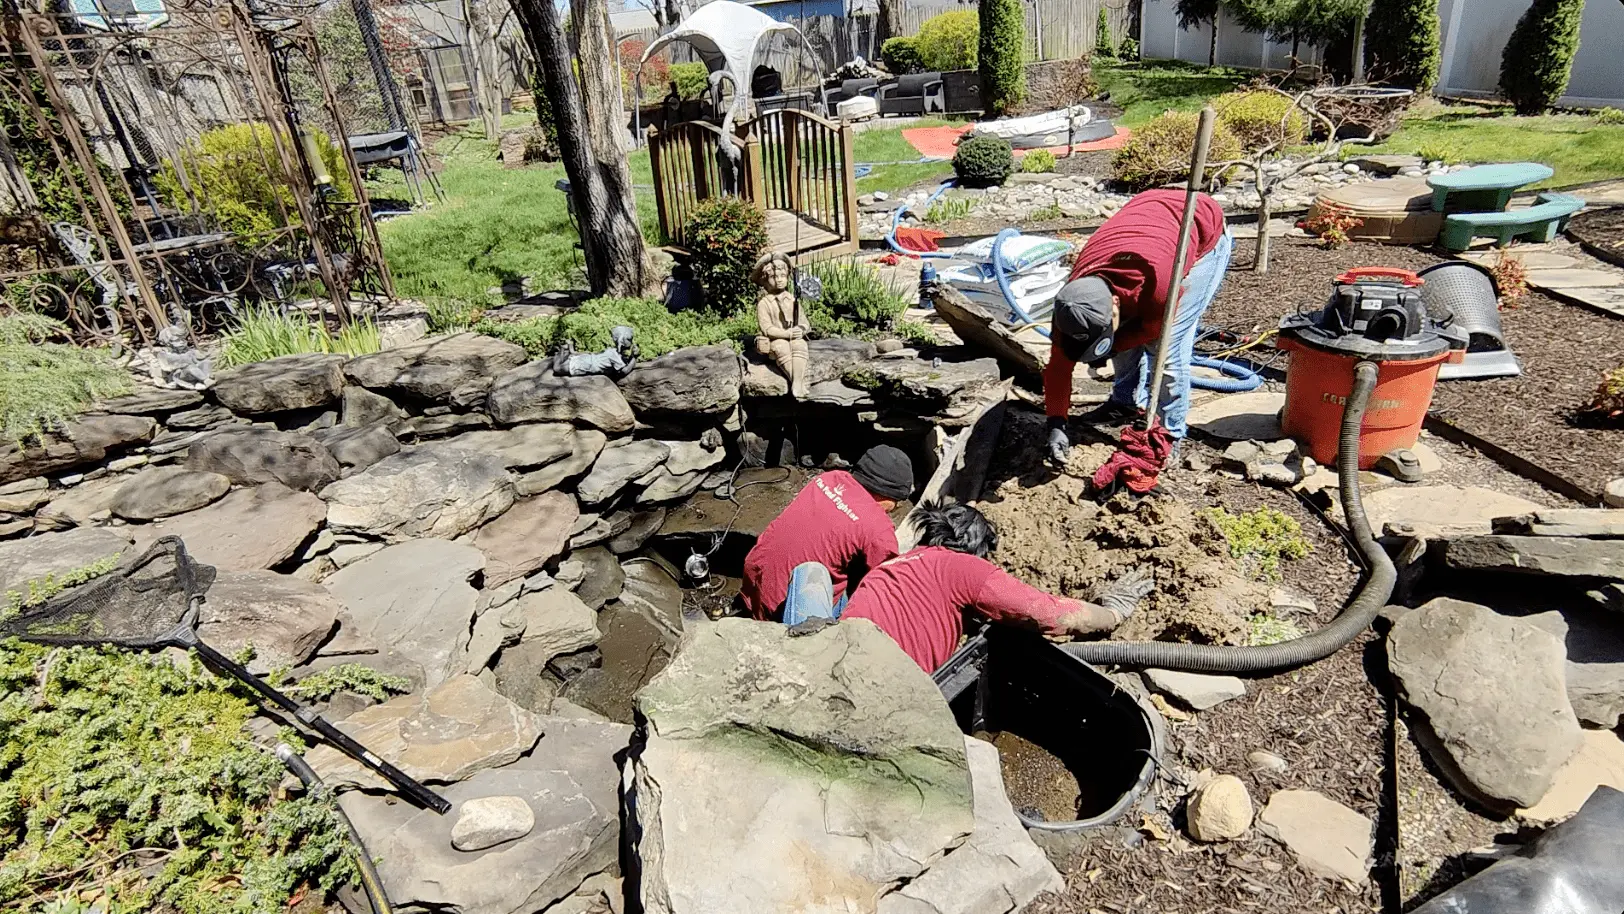 Sometimes the wall of a backyard pond can collapse due to poor construction. In this photo our crew is removing the large edge stones in order to access and repair the ground underneath it.